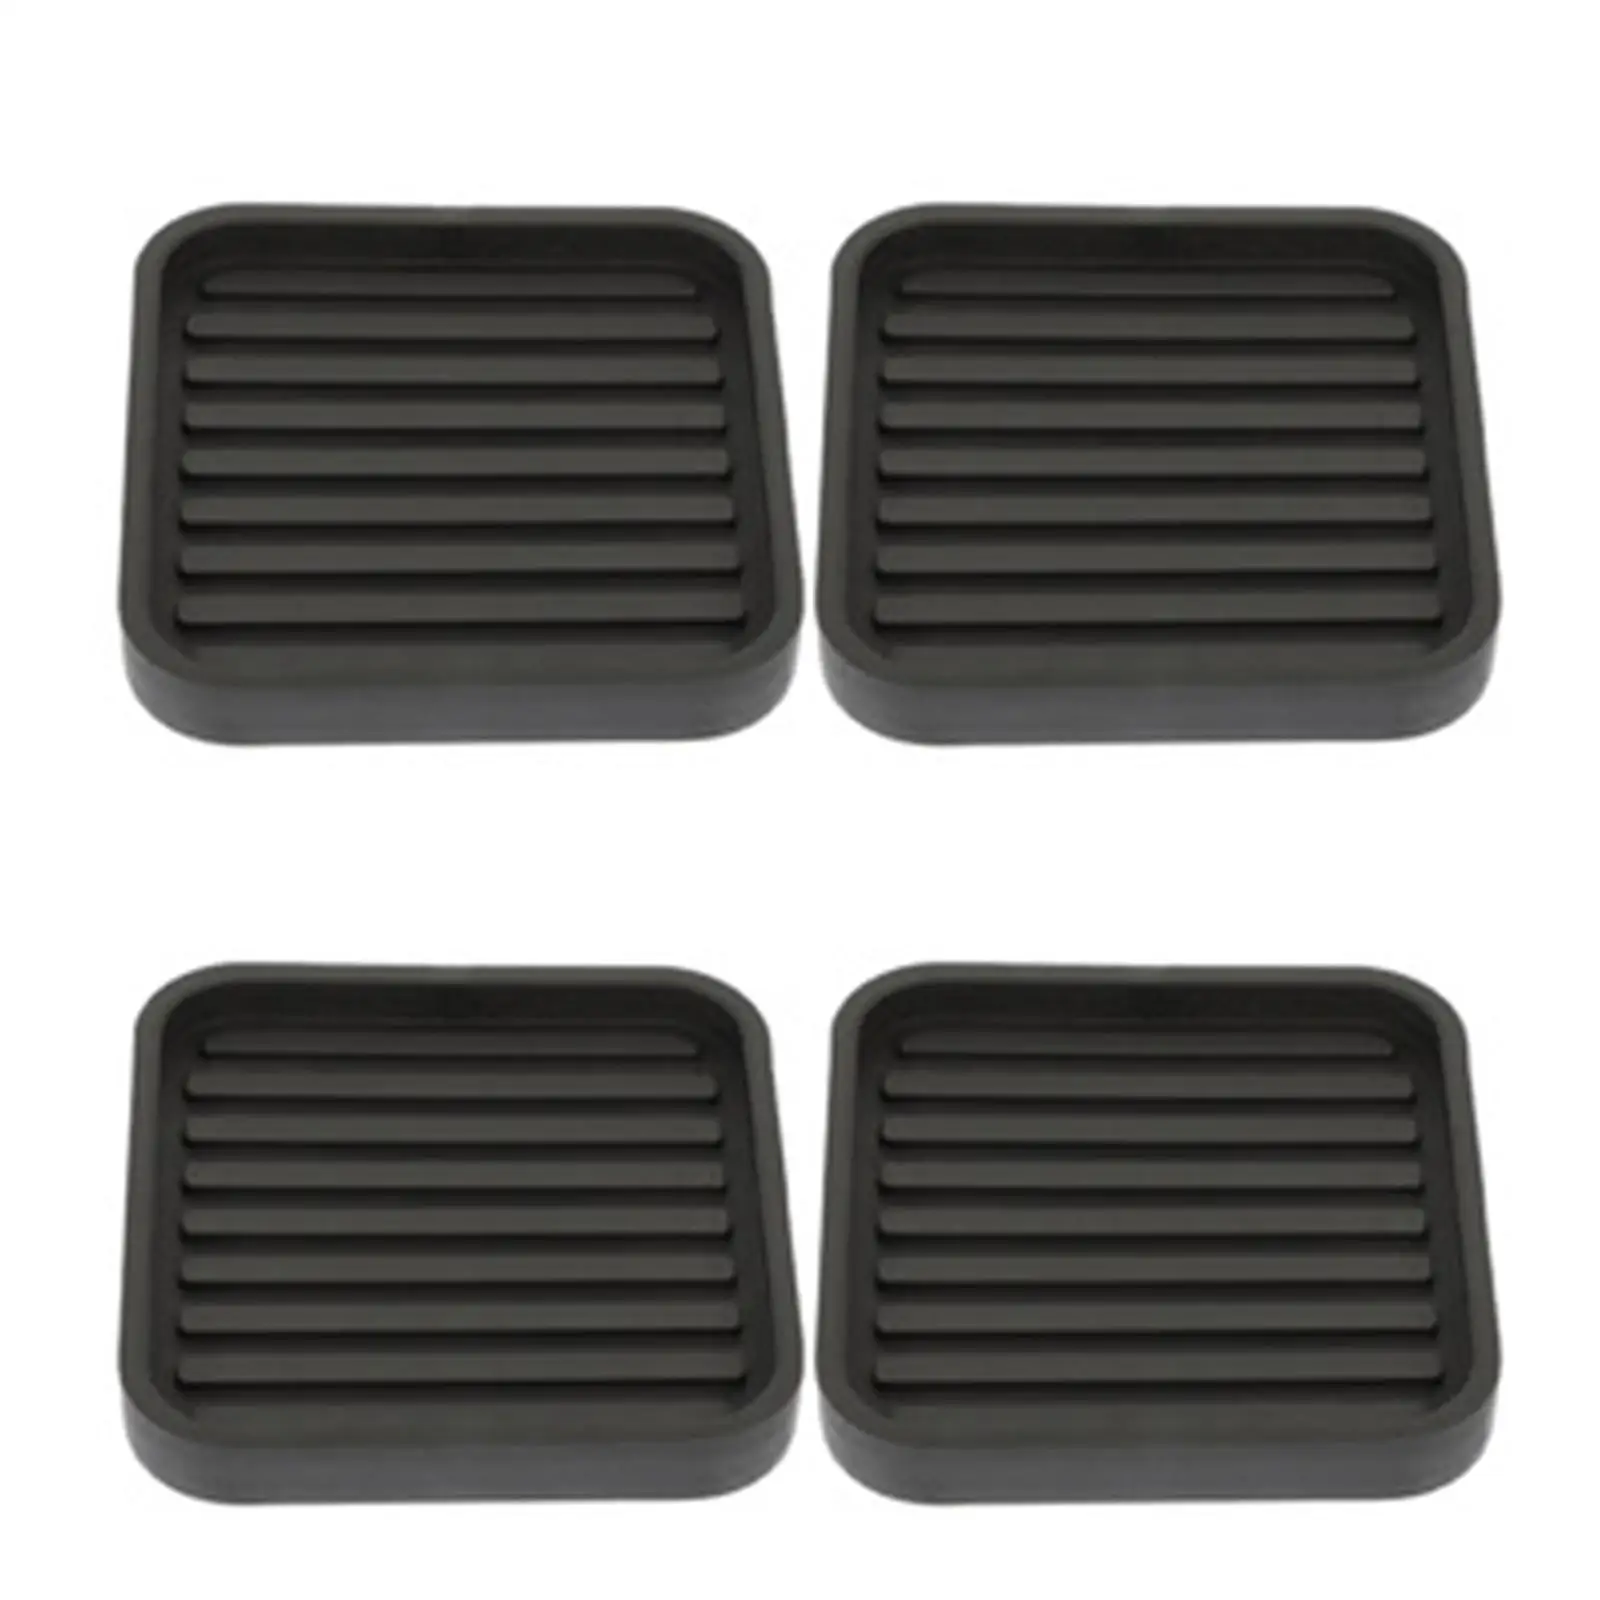 4Pcs Non Slip Square Rubber Furniture Caster Cups for Furniture Chairs